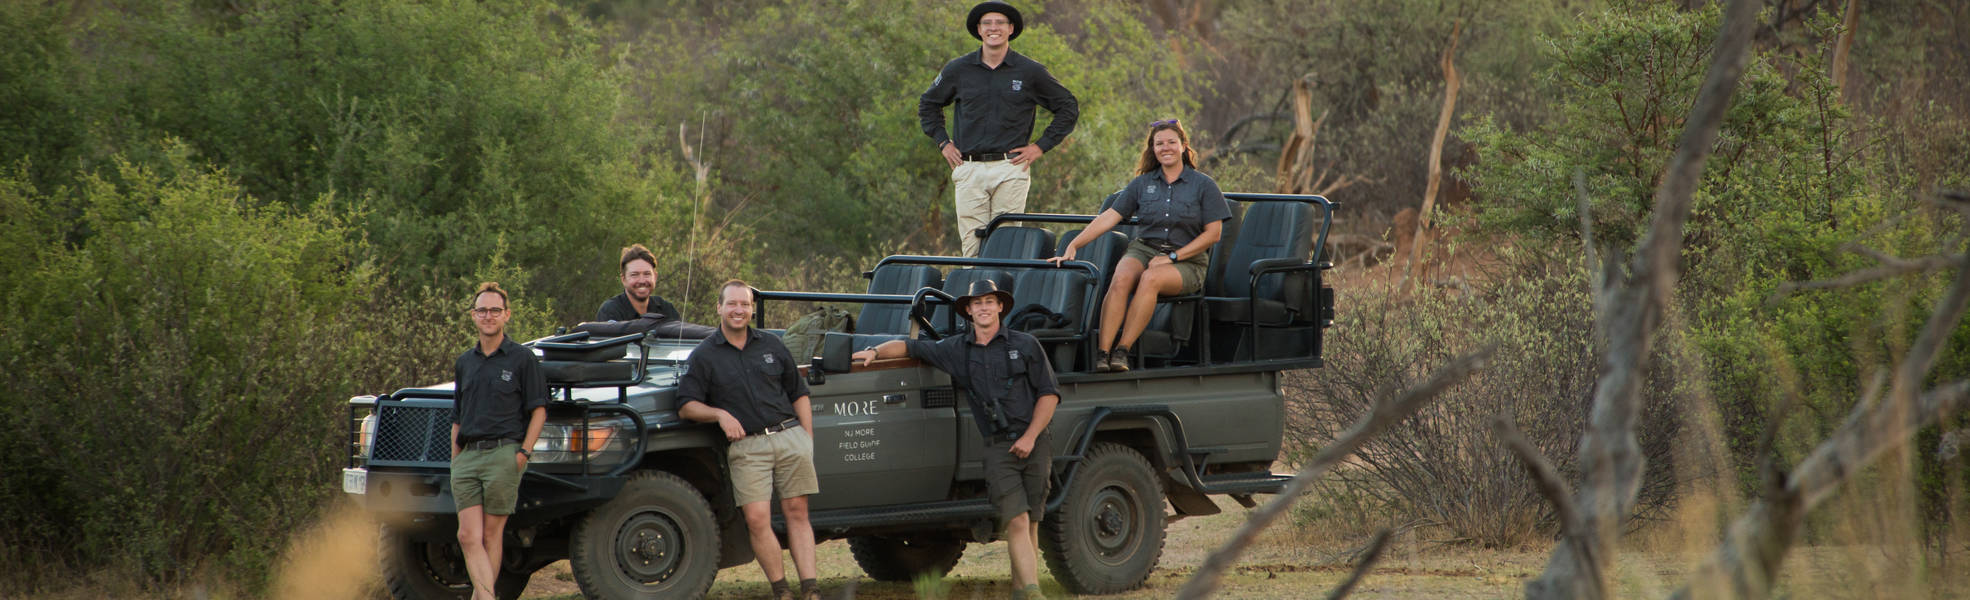 Ranger training in South Africa as a sabbatical